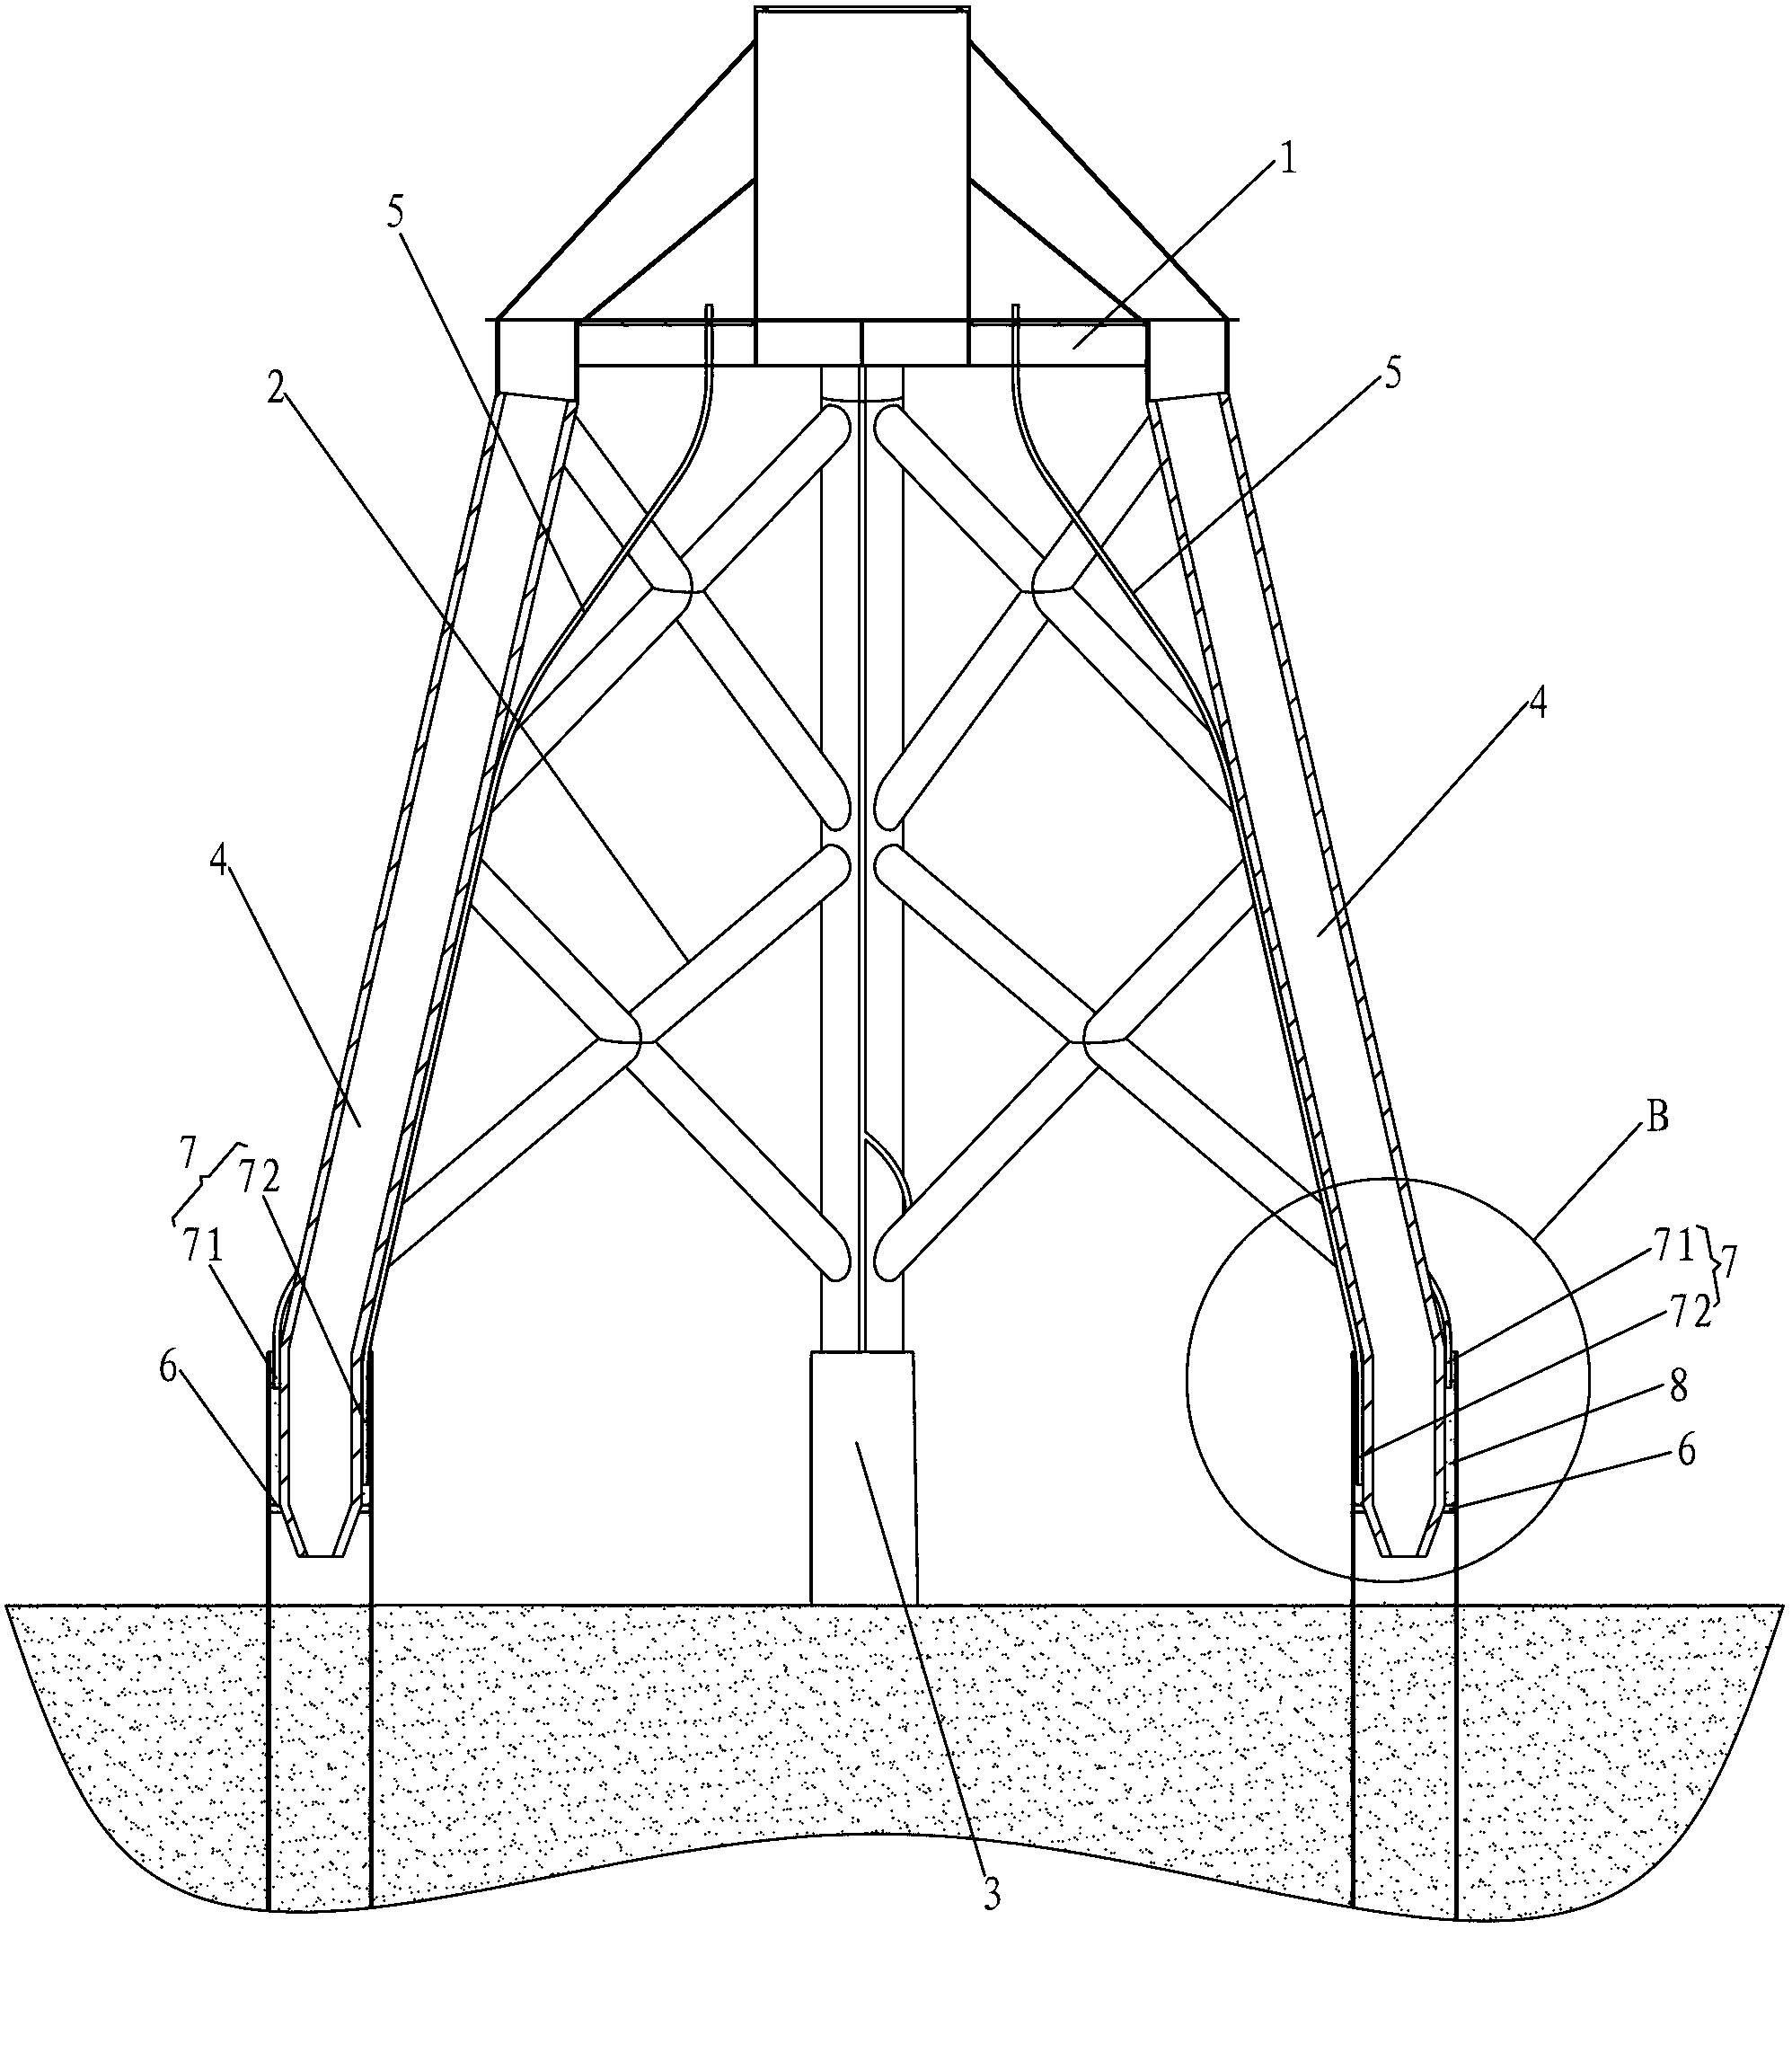 Jacket support structure capable of being connected through grouting